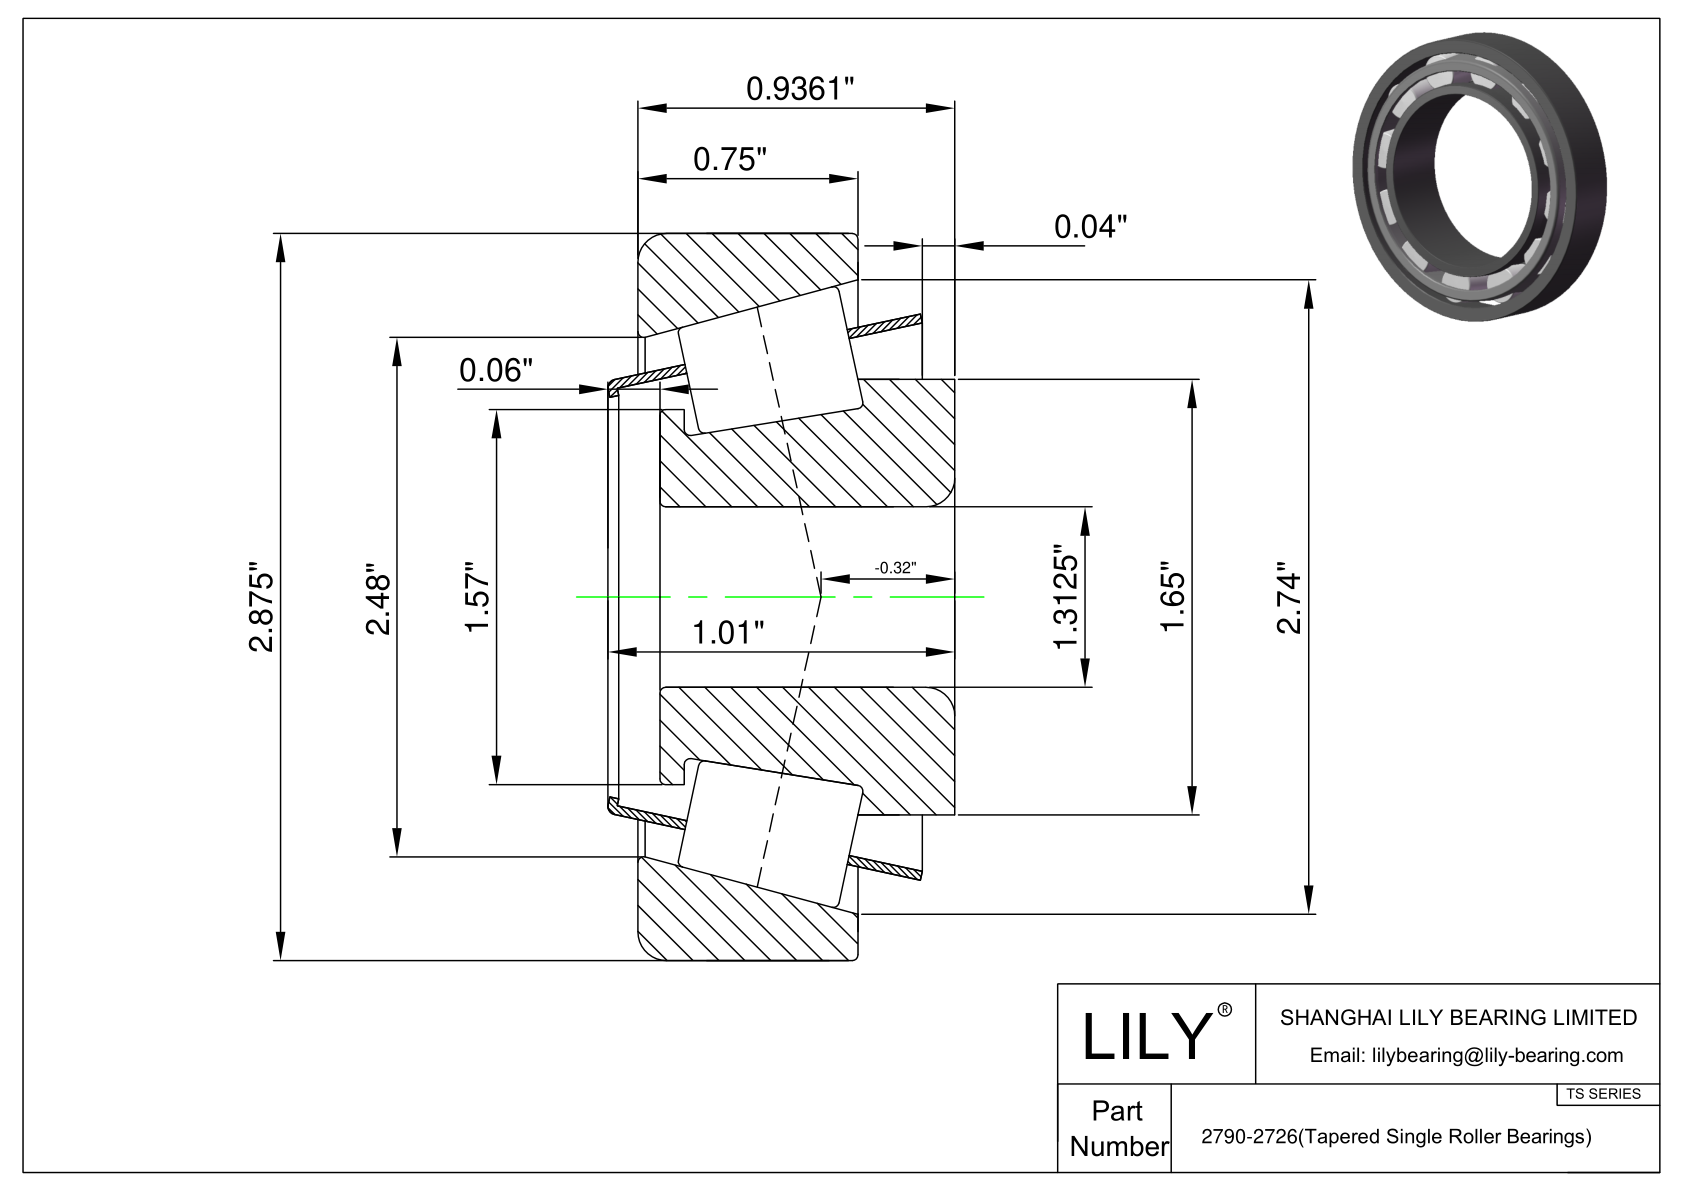 2790-2726 TS (Tapered Single Roller Bearings) (Imperial) cad drawing